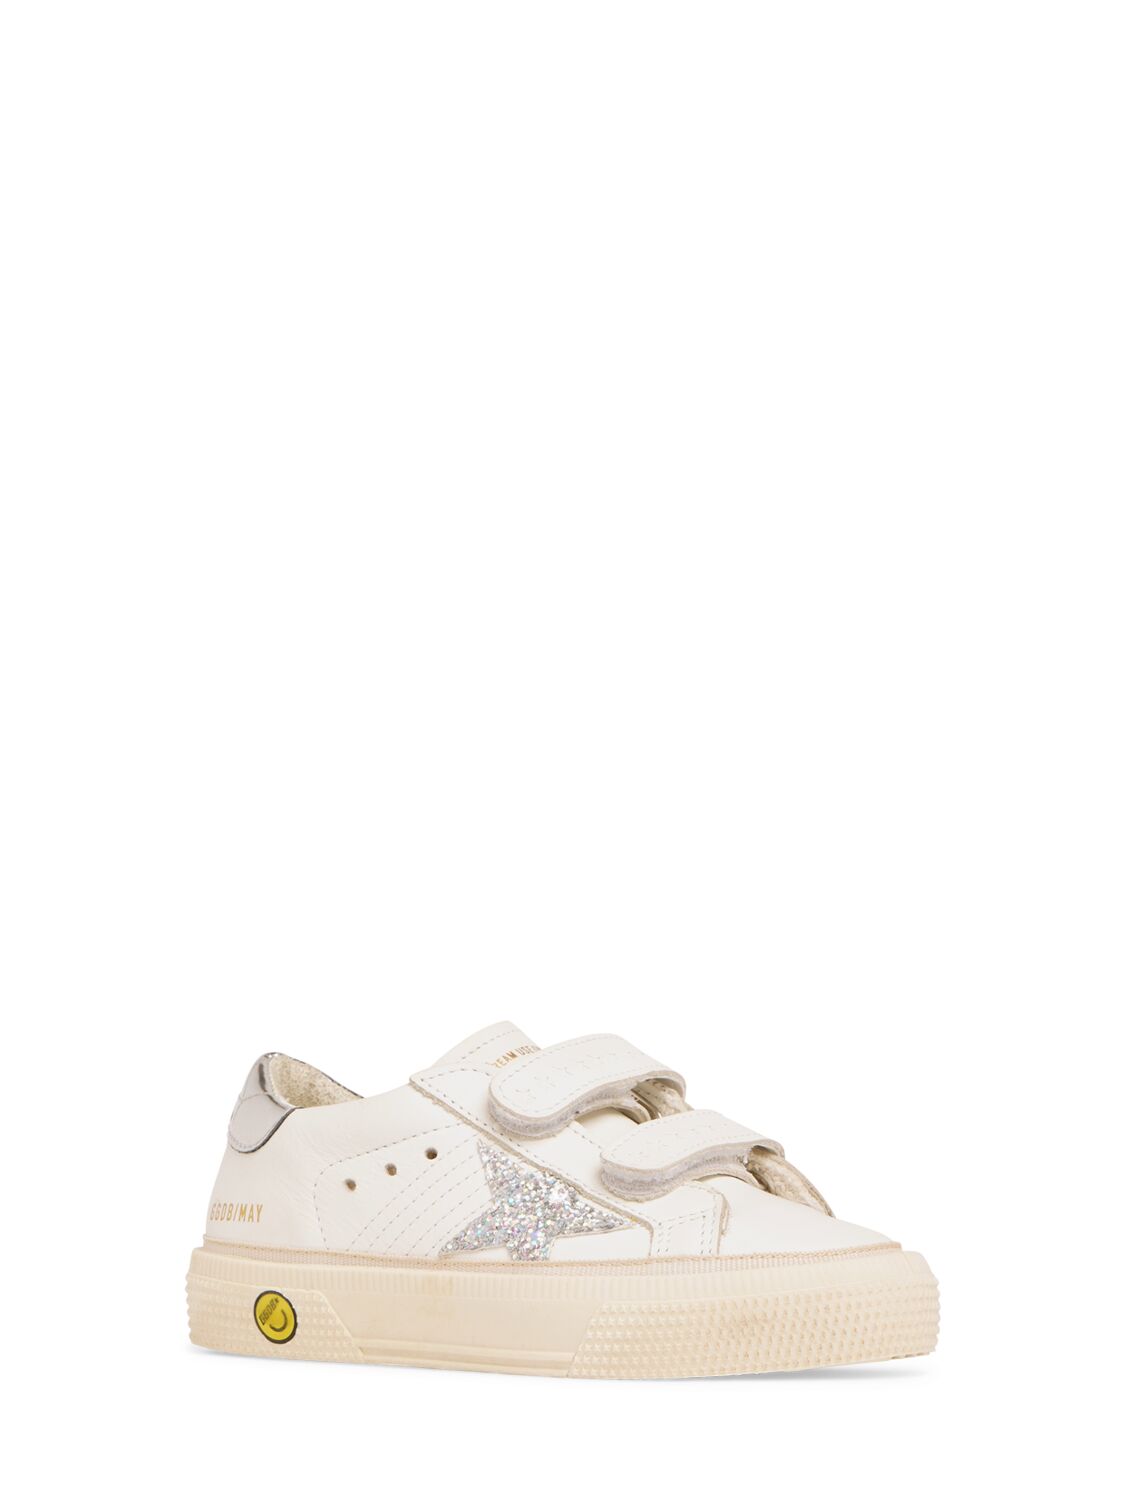 Shop Golden Goose May School Leather Strap Sneakers In White,silver